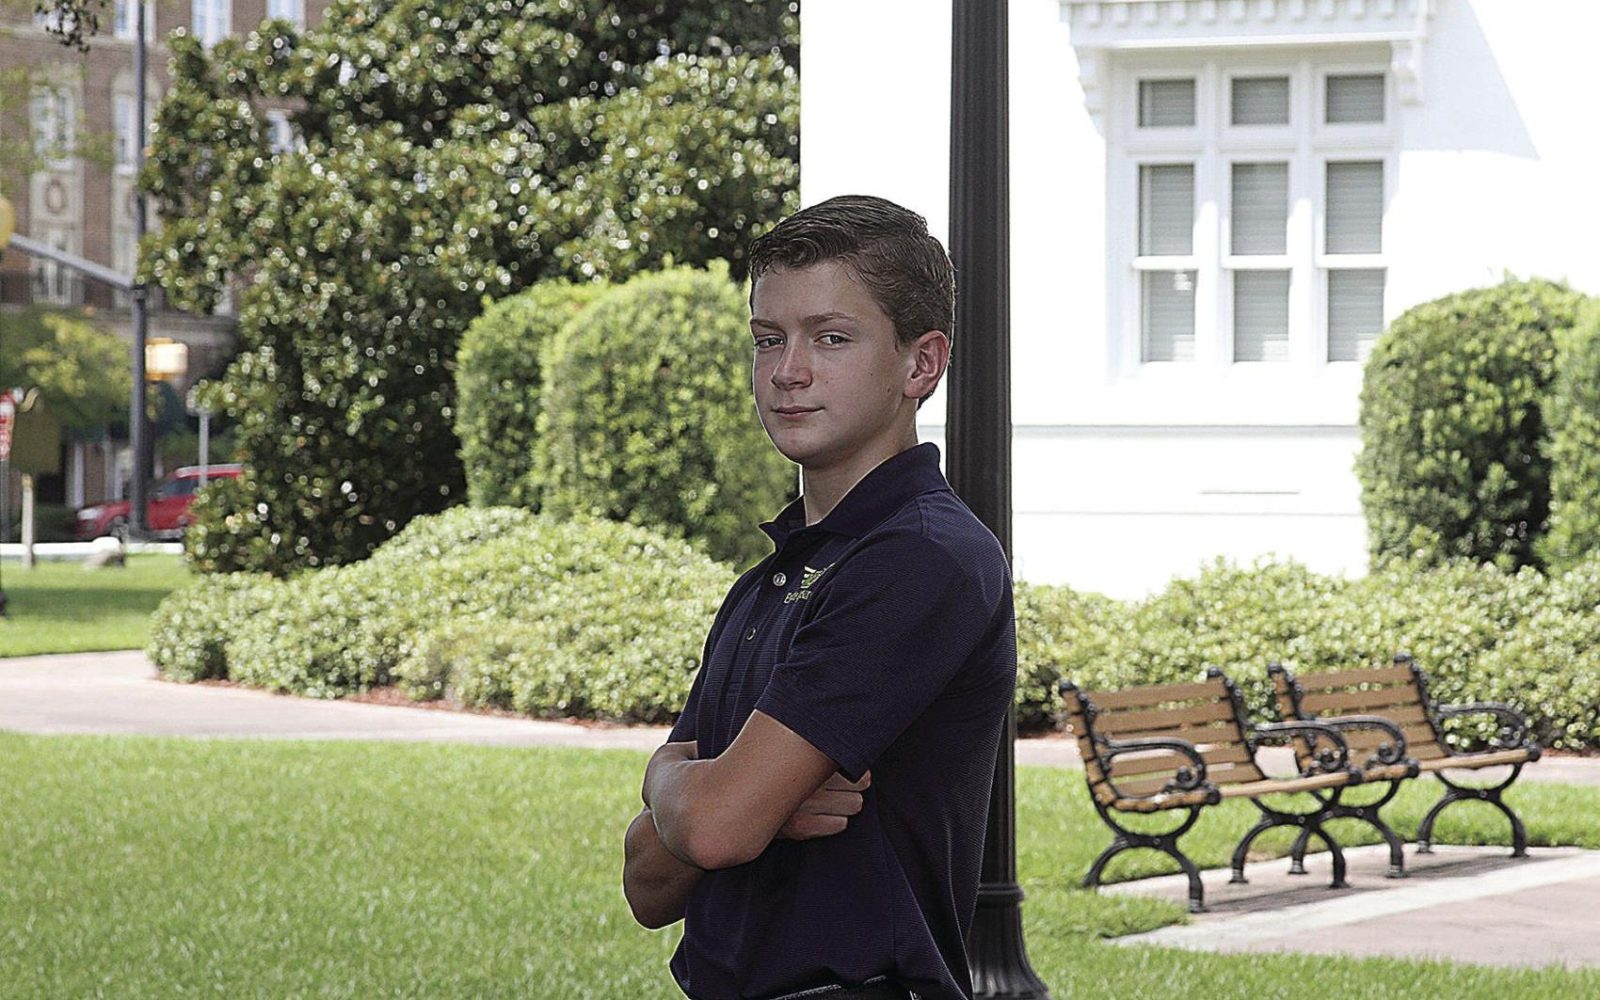 Fourteen-year-old is making money with his drone